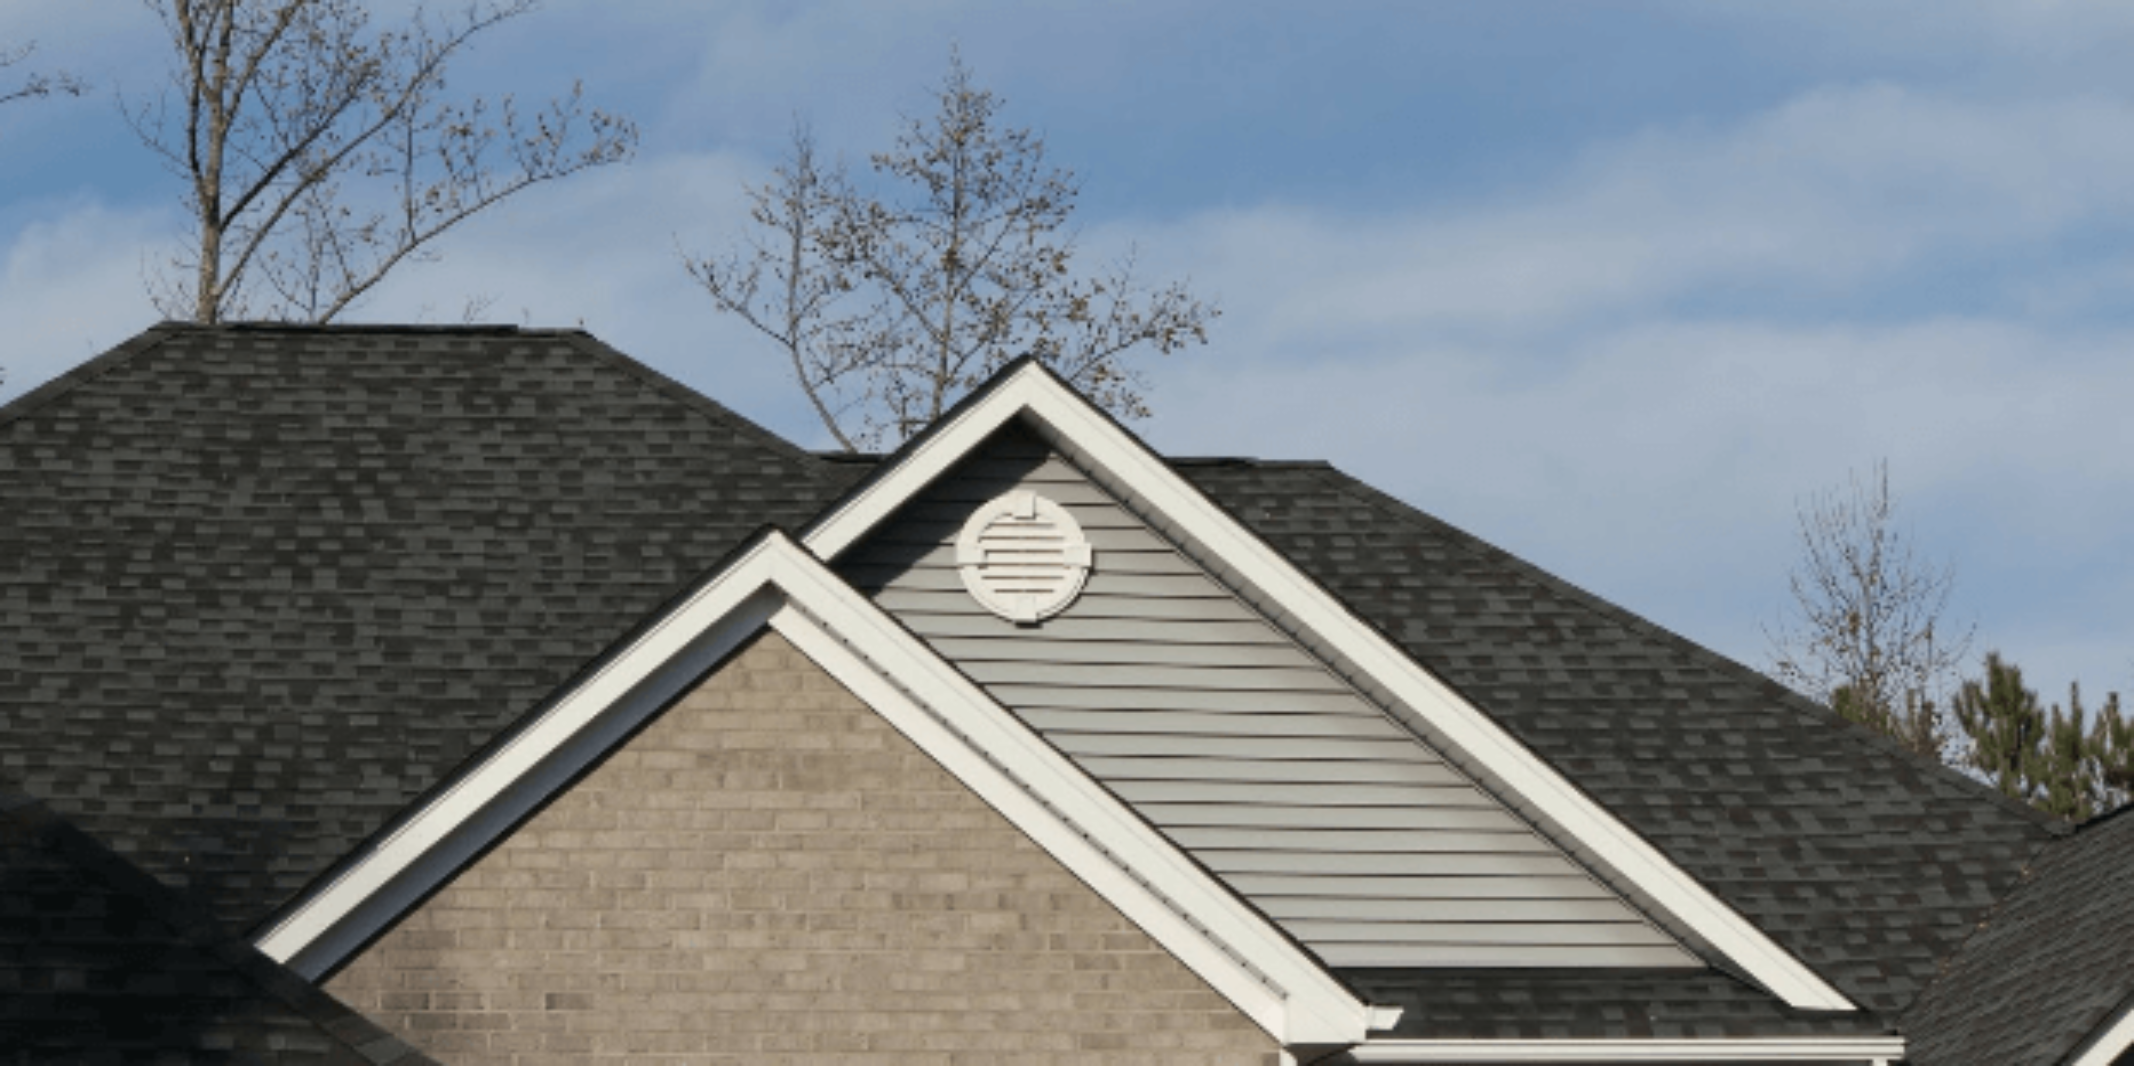 A residential roof with a perfect roofline provided by professional soffit and fascia repair services.